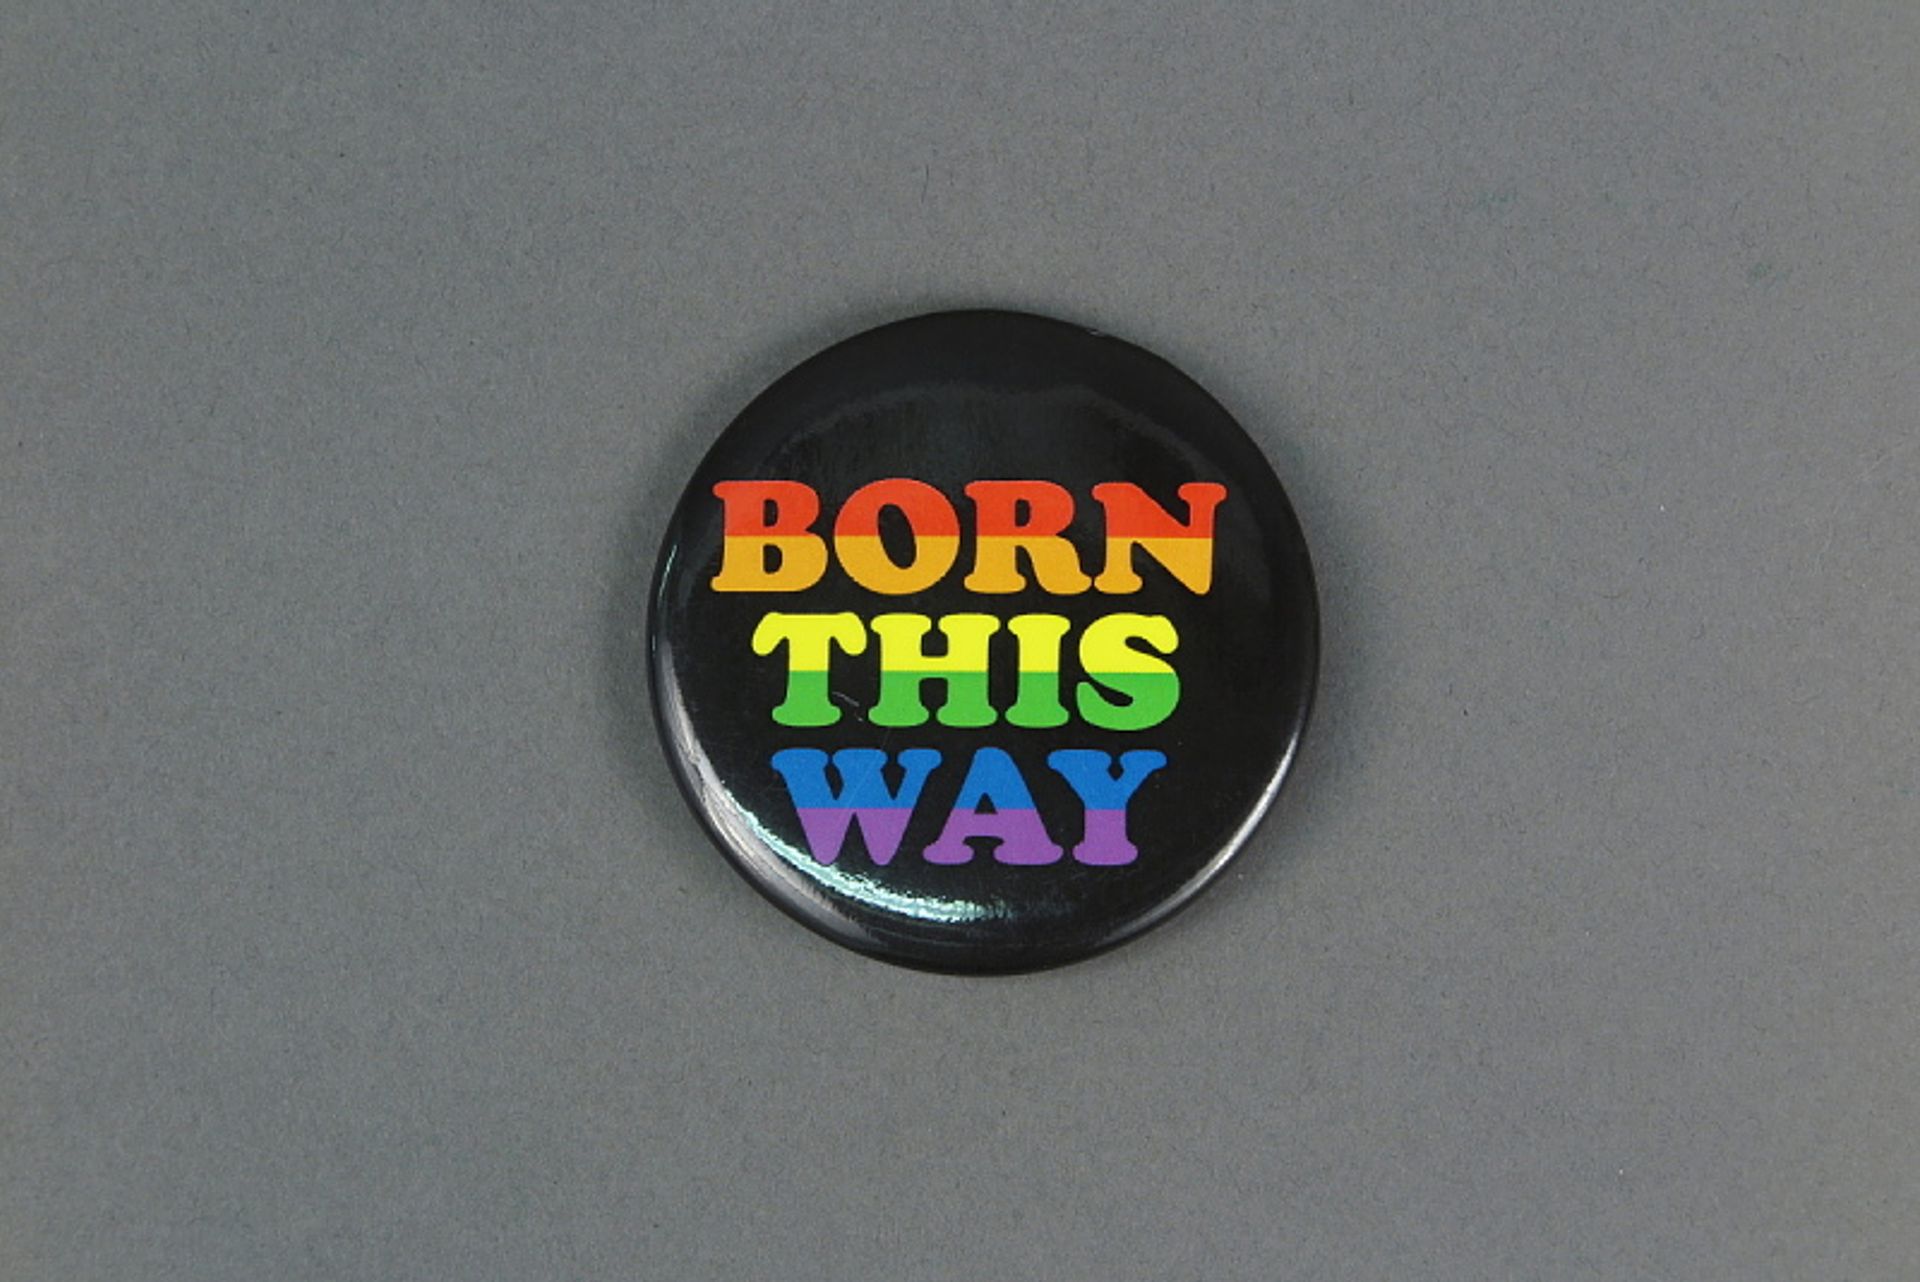 Born This Way button, National Museum of American History Gift of Robert Voorheis and Michael Sabatino